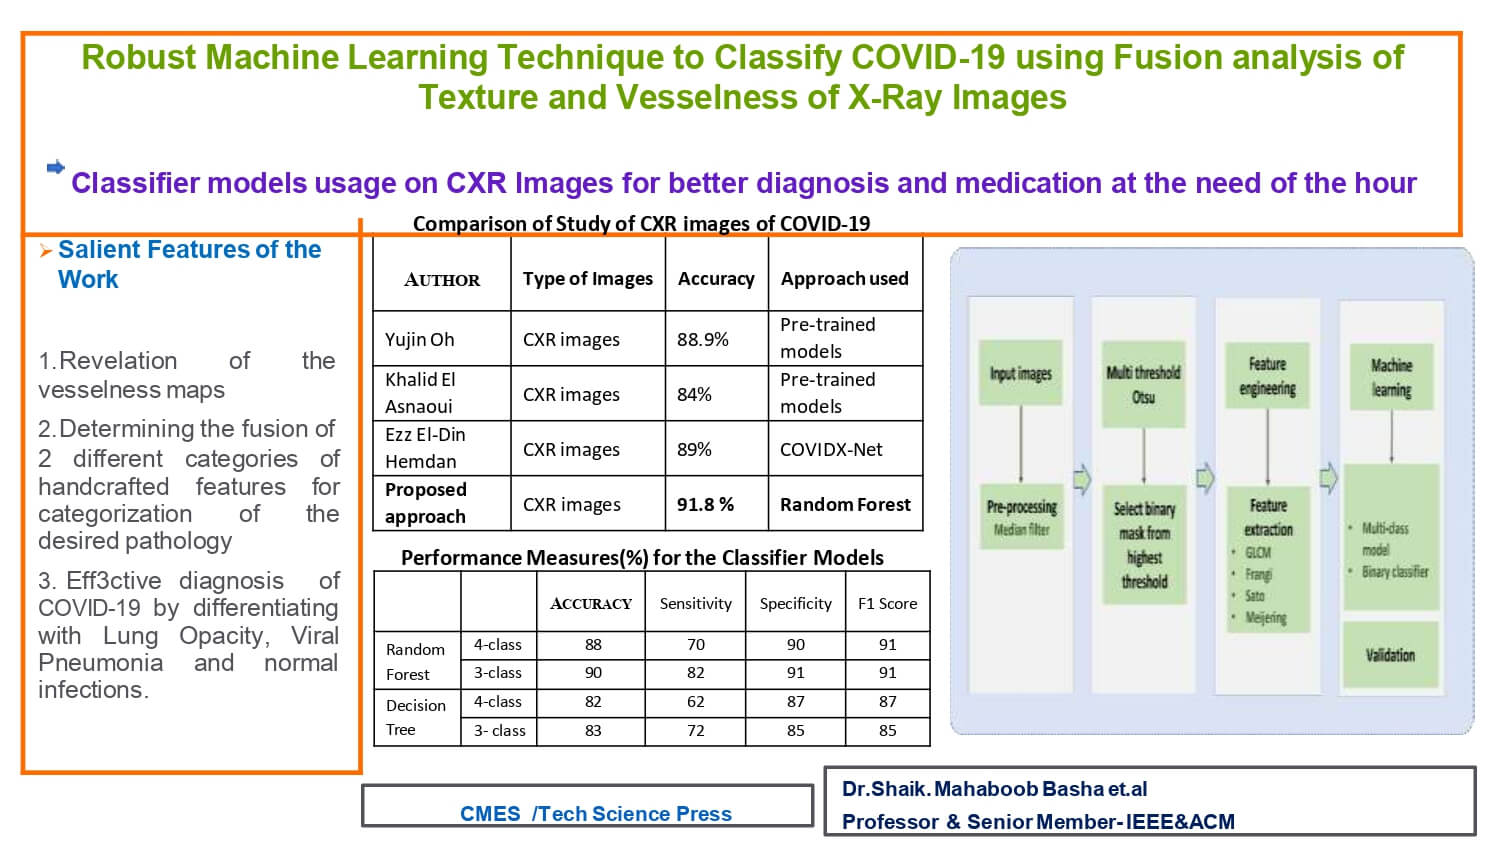 Robust Machine Learning Technique to Classify COVID-19 Using Fusion of Texture and Vesselness of X-Ray Images